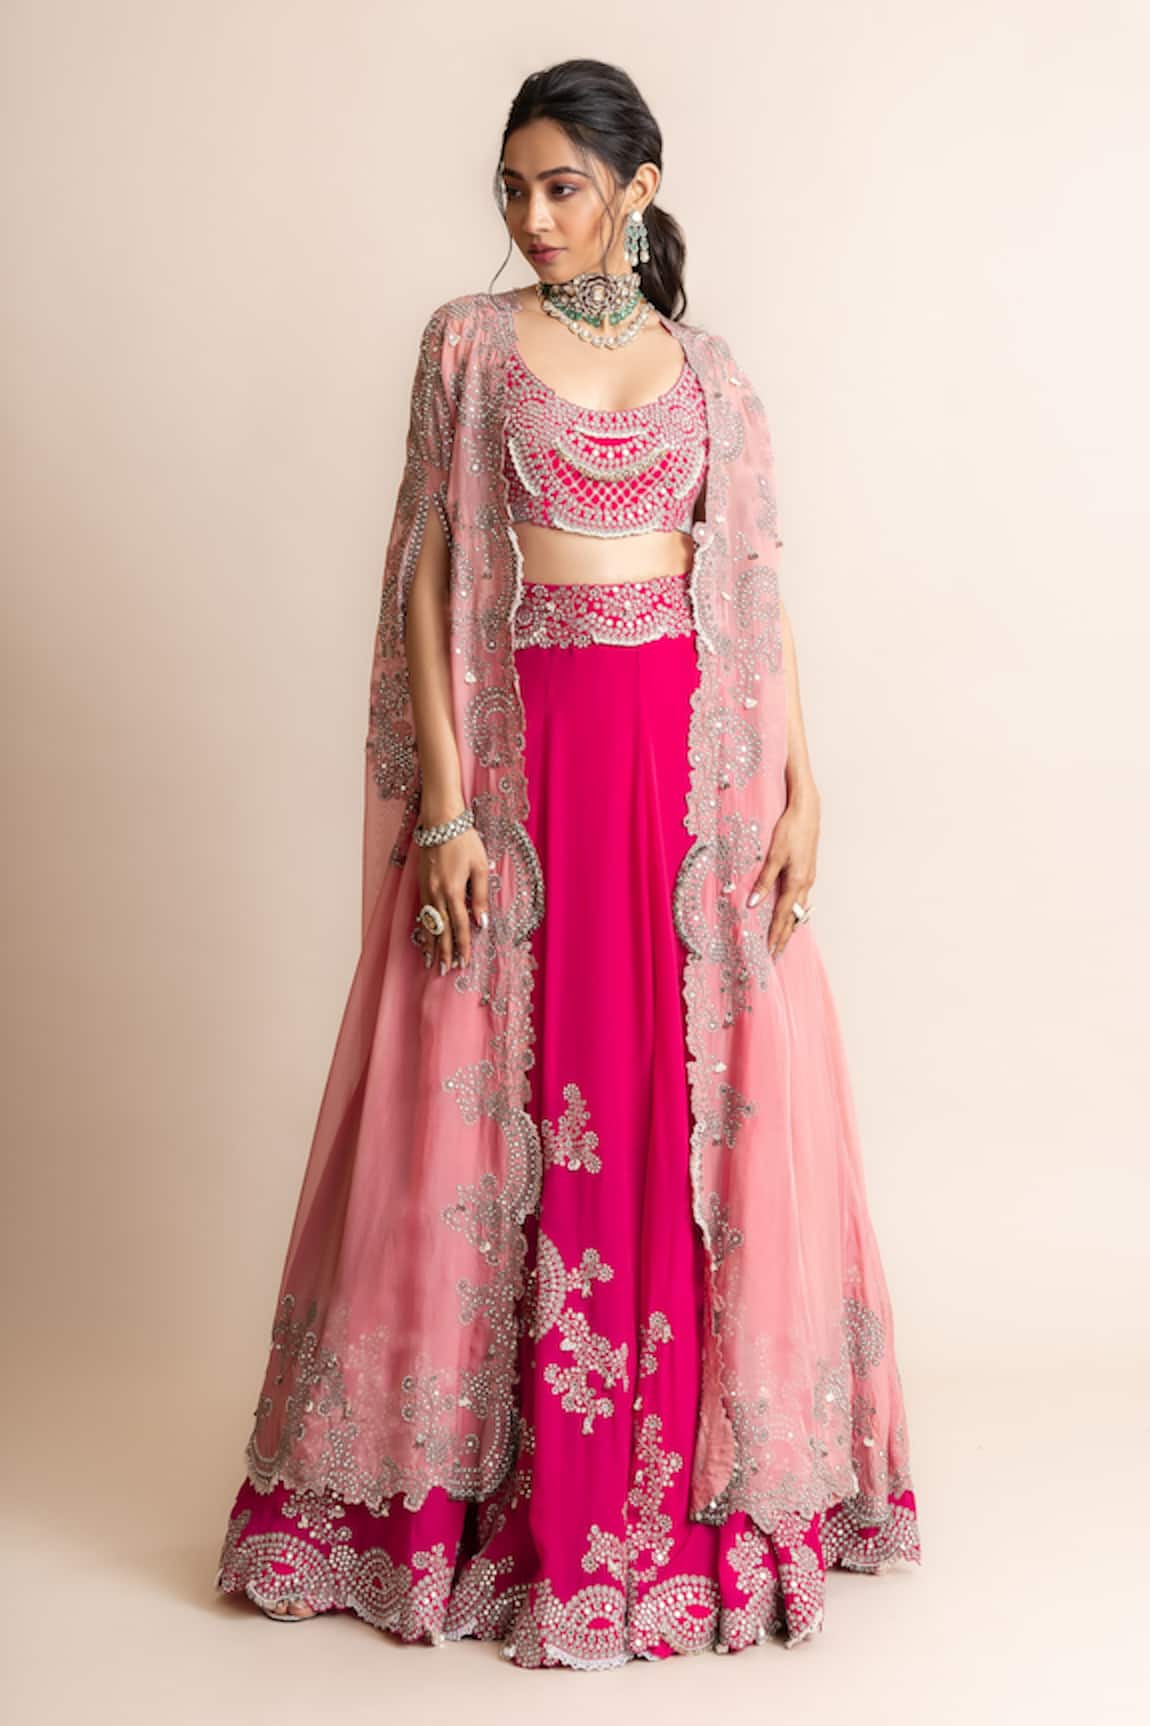 Nupur Kanoi Floral Embroidered Lehenga With Long Cape